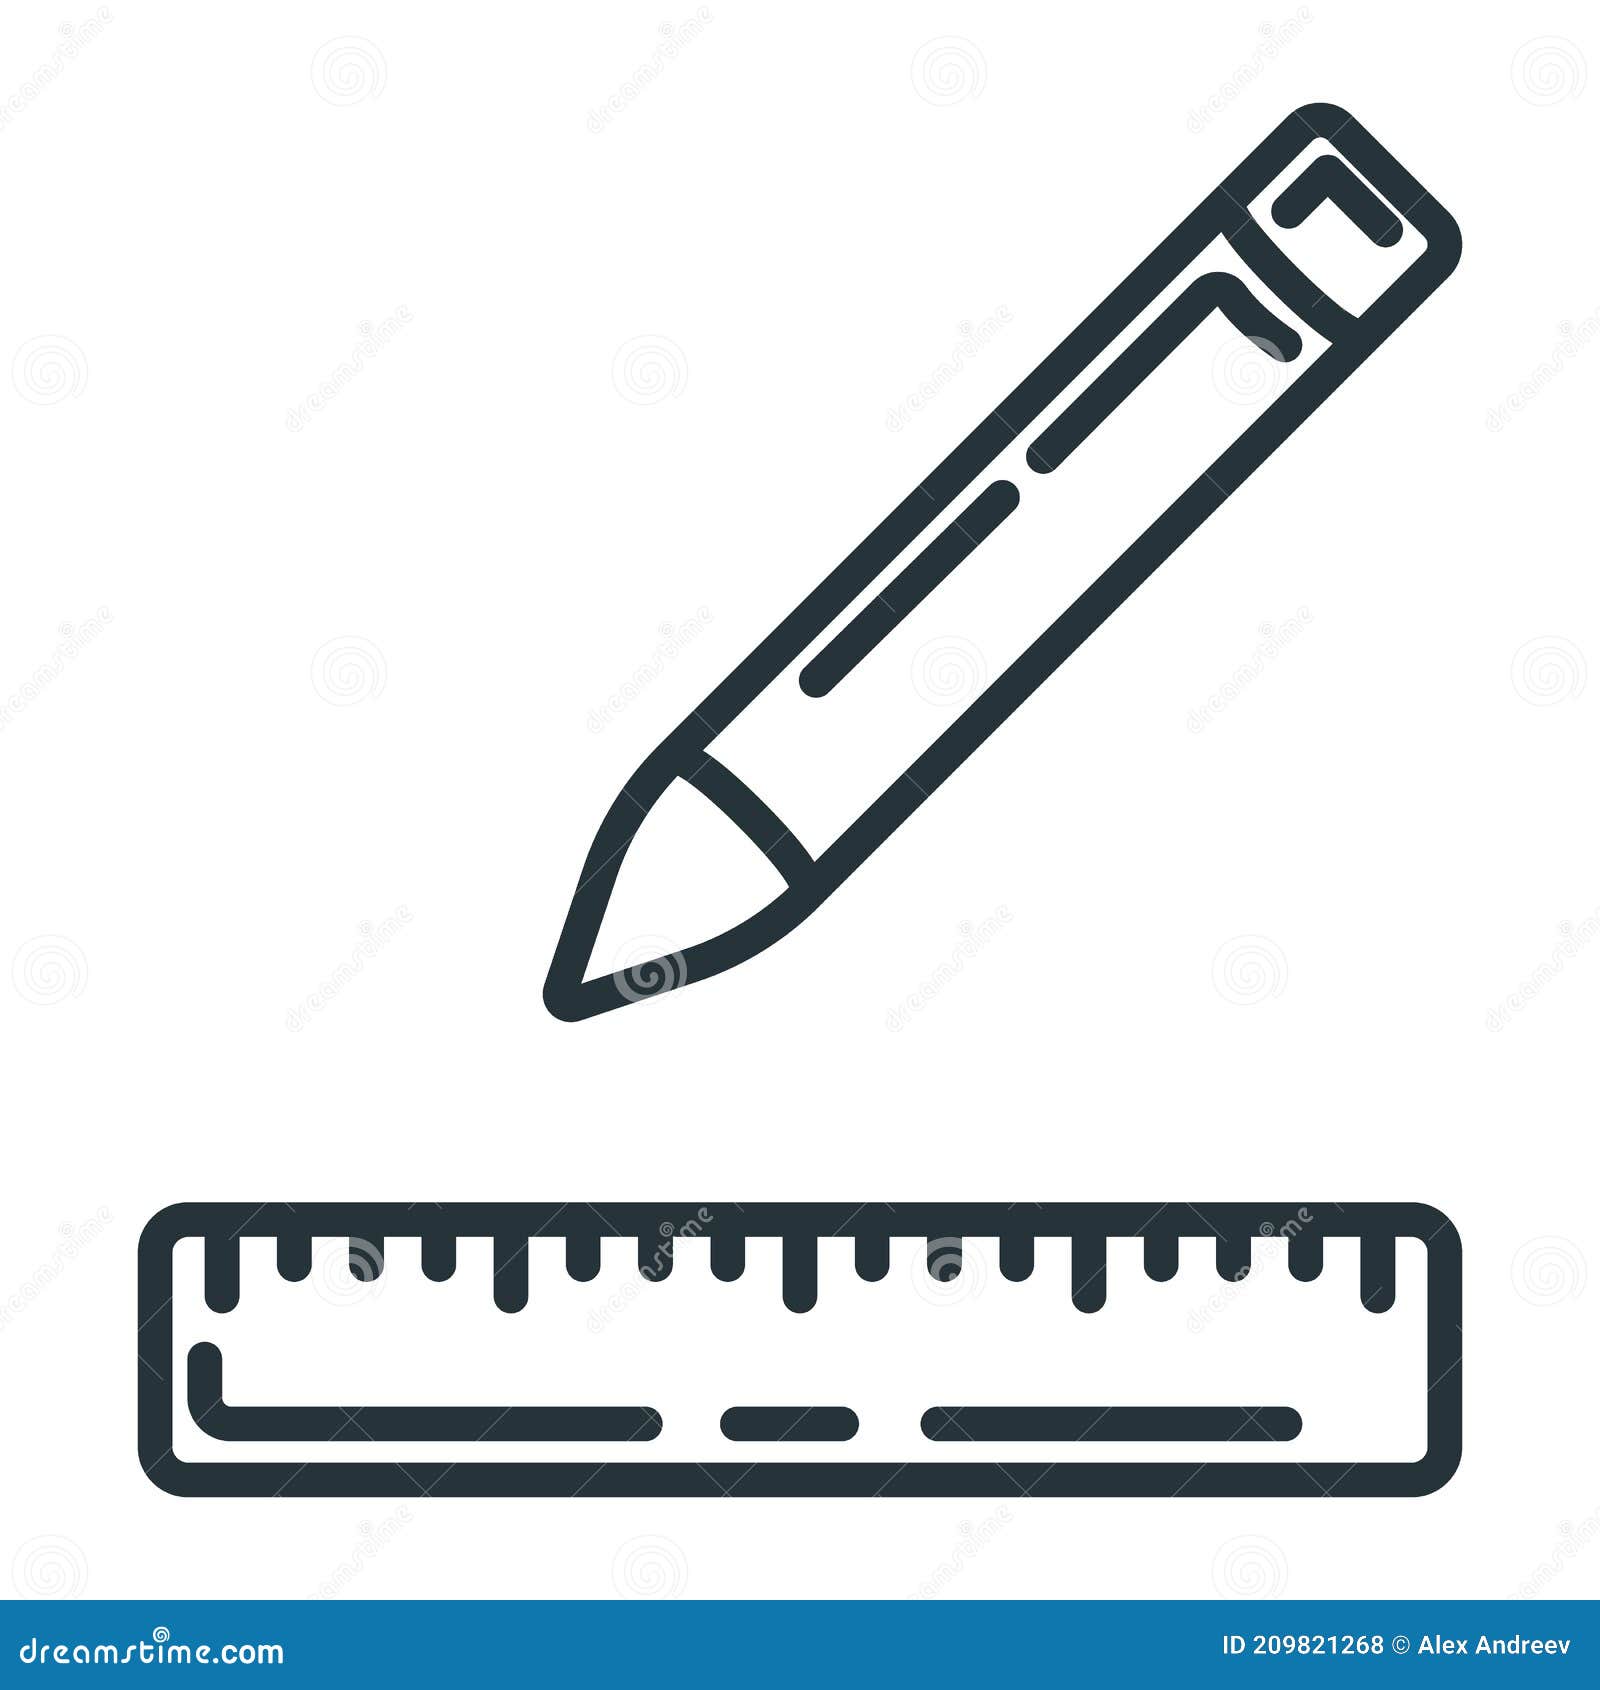 Concept pencil, wooden ruler triangle icon, writing pen and